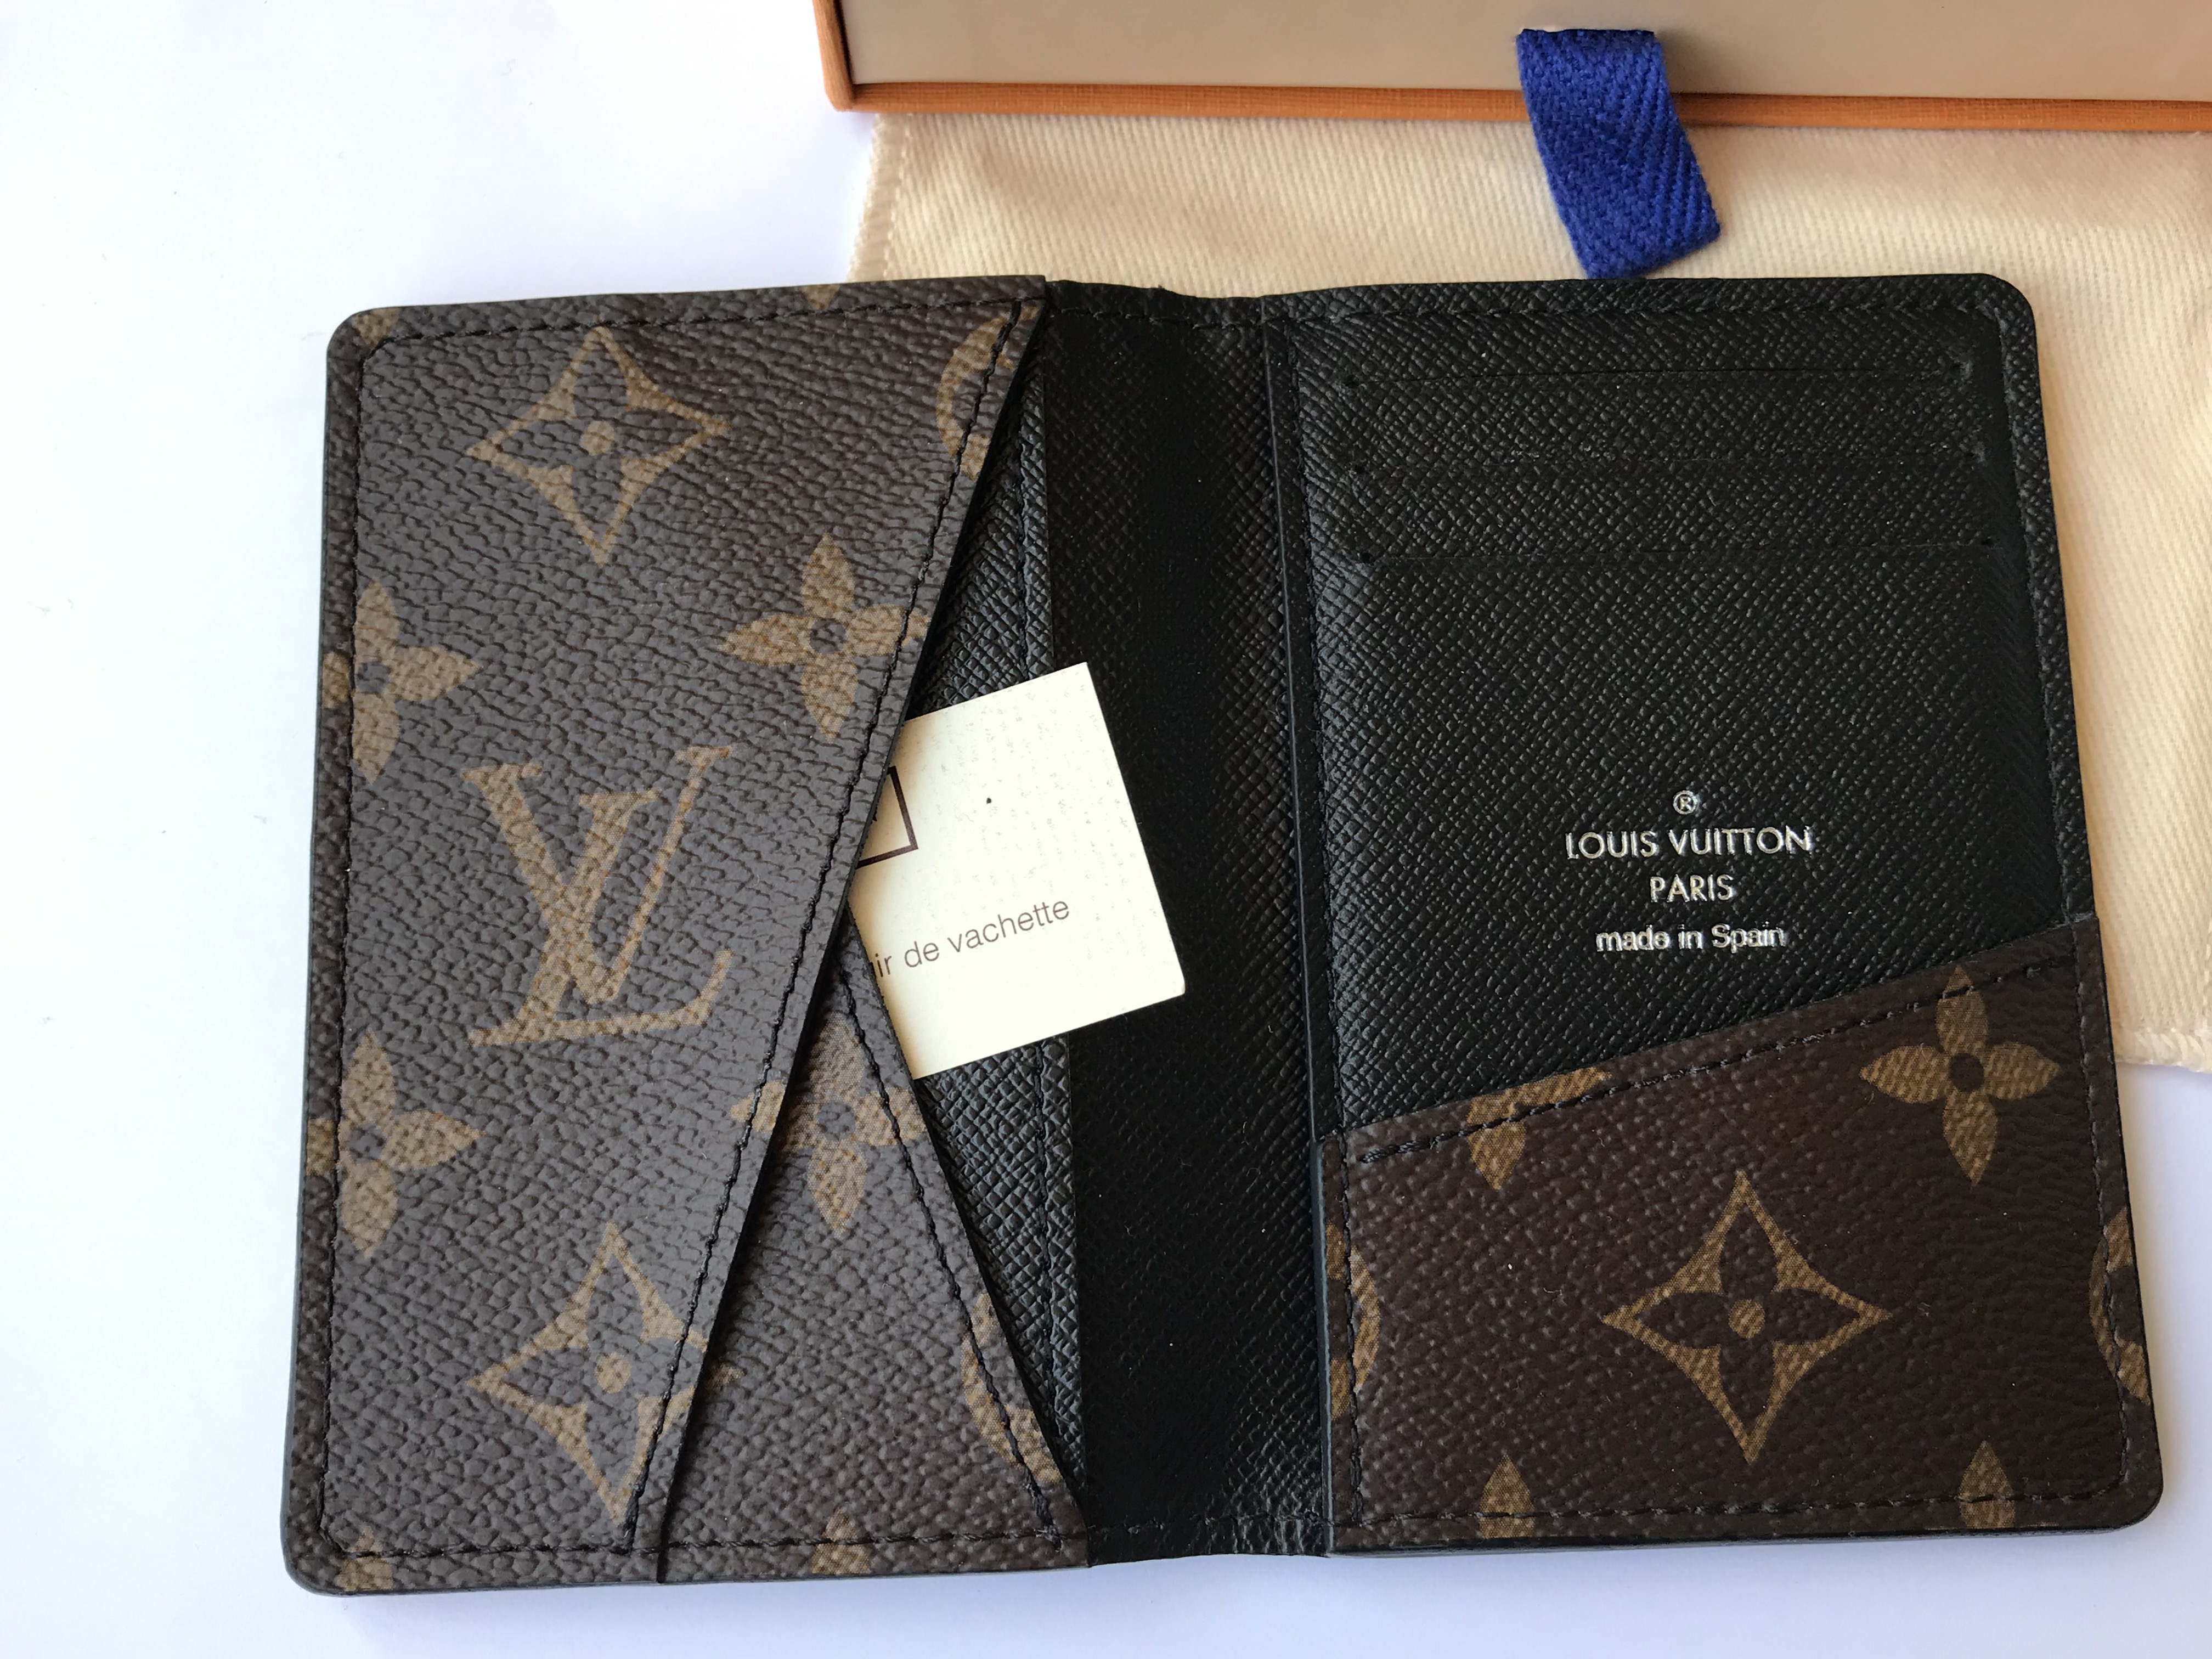 Louis Vuitton - Authenticated Monogram Solar Ray Organizer Small Bag - Leather Brown for Men, Good Condition